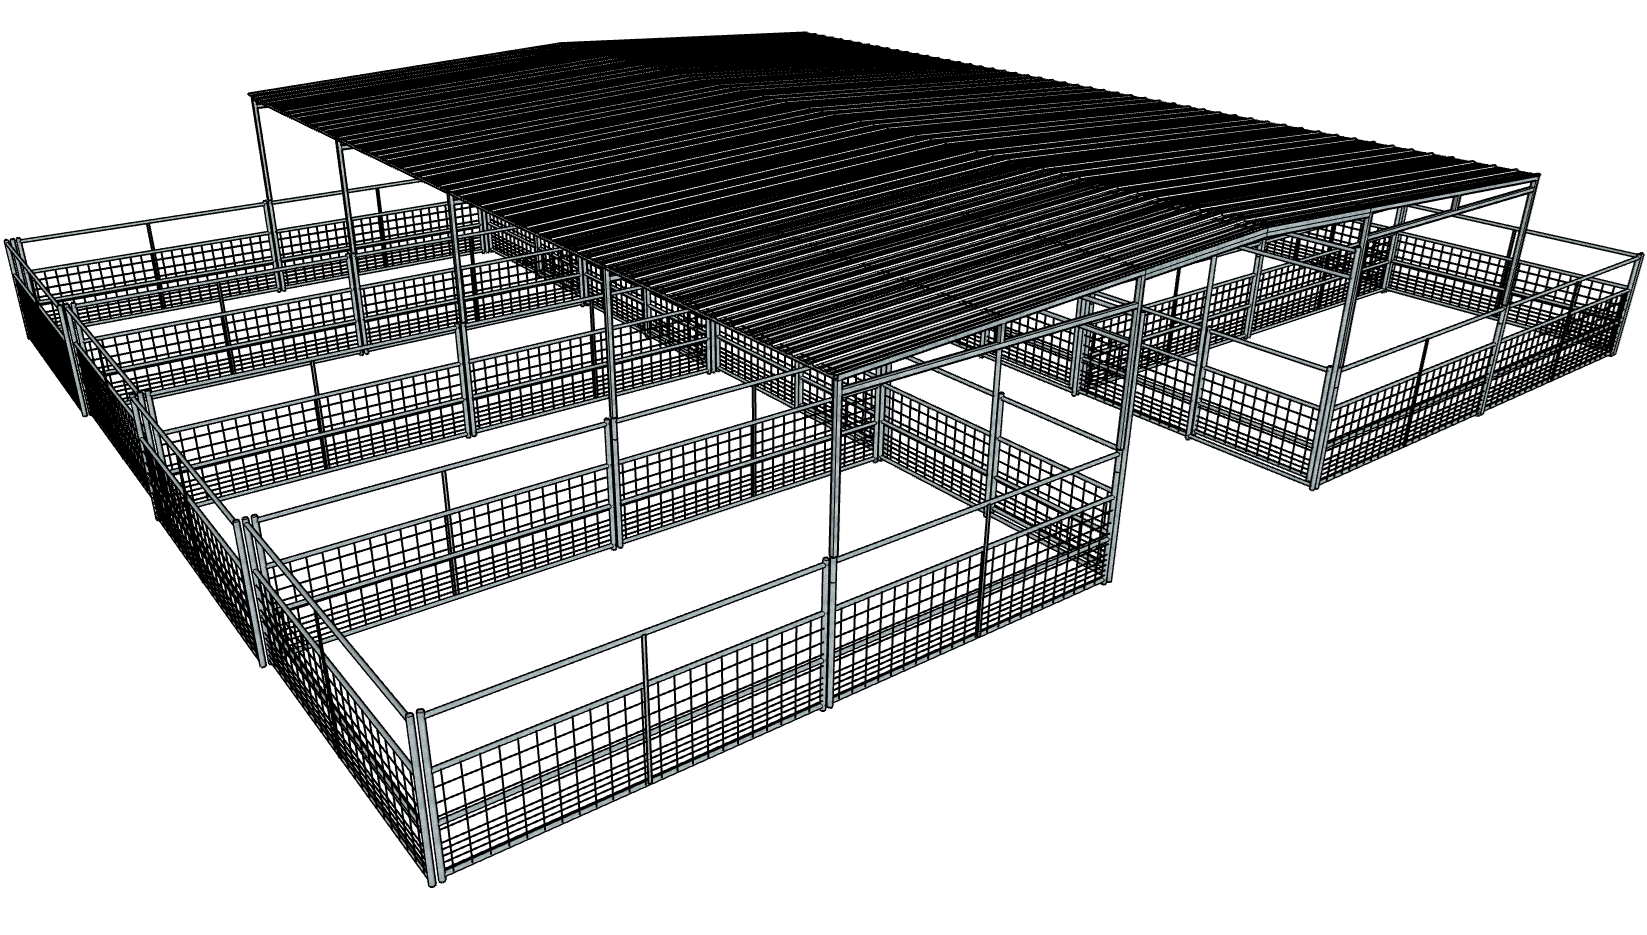 Galvanized 50 Ft X 40 Ft 4-Rail with Mesh 8 Stall Barn Kit with 30 Ft Gable Roof